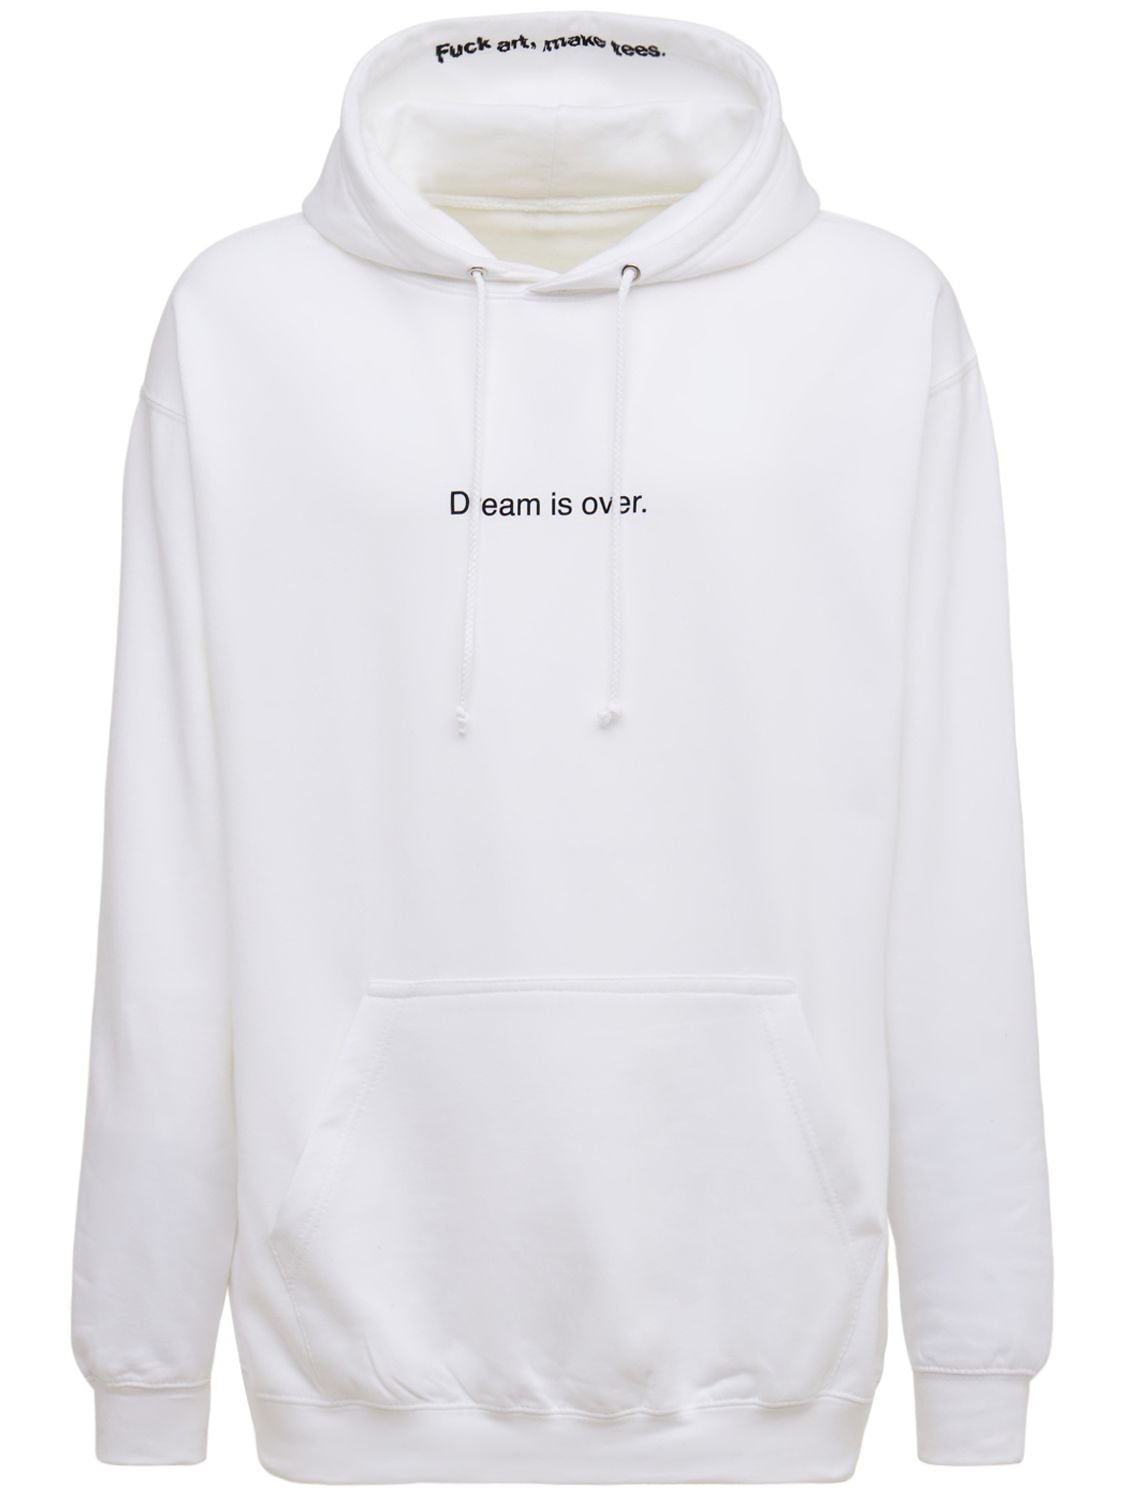 FAMT - FUCK ART MAKE TEES Dream Is Over Cotton Blend Hoodie